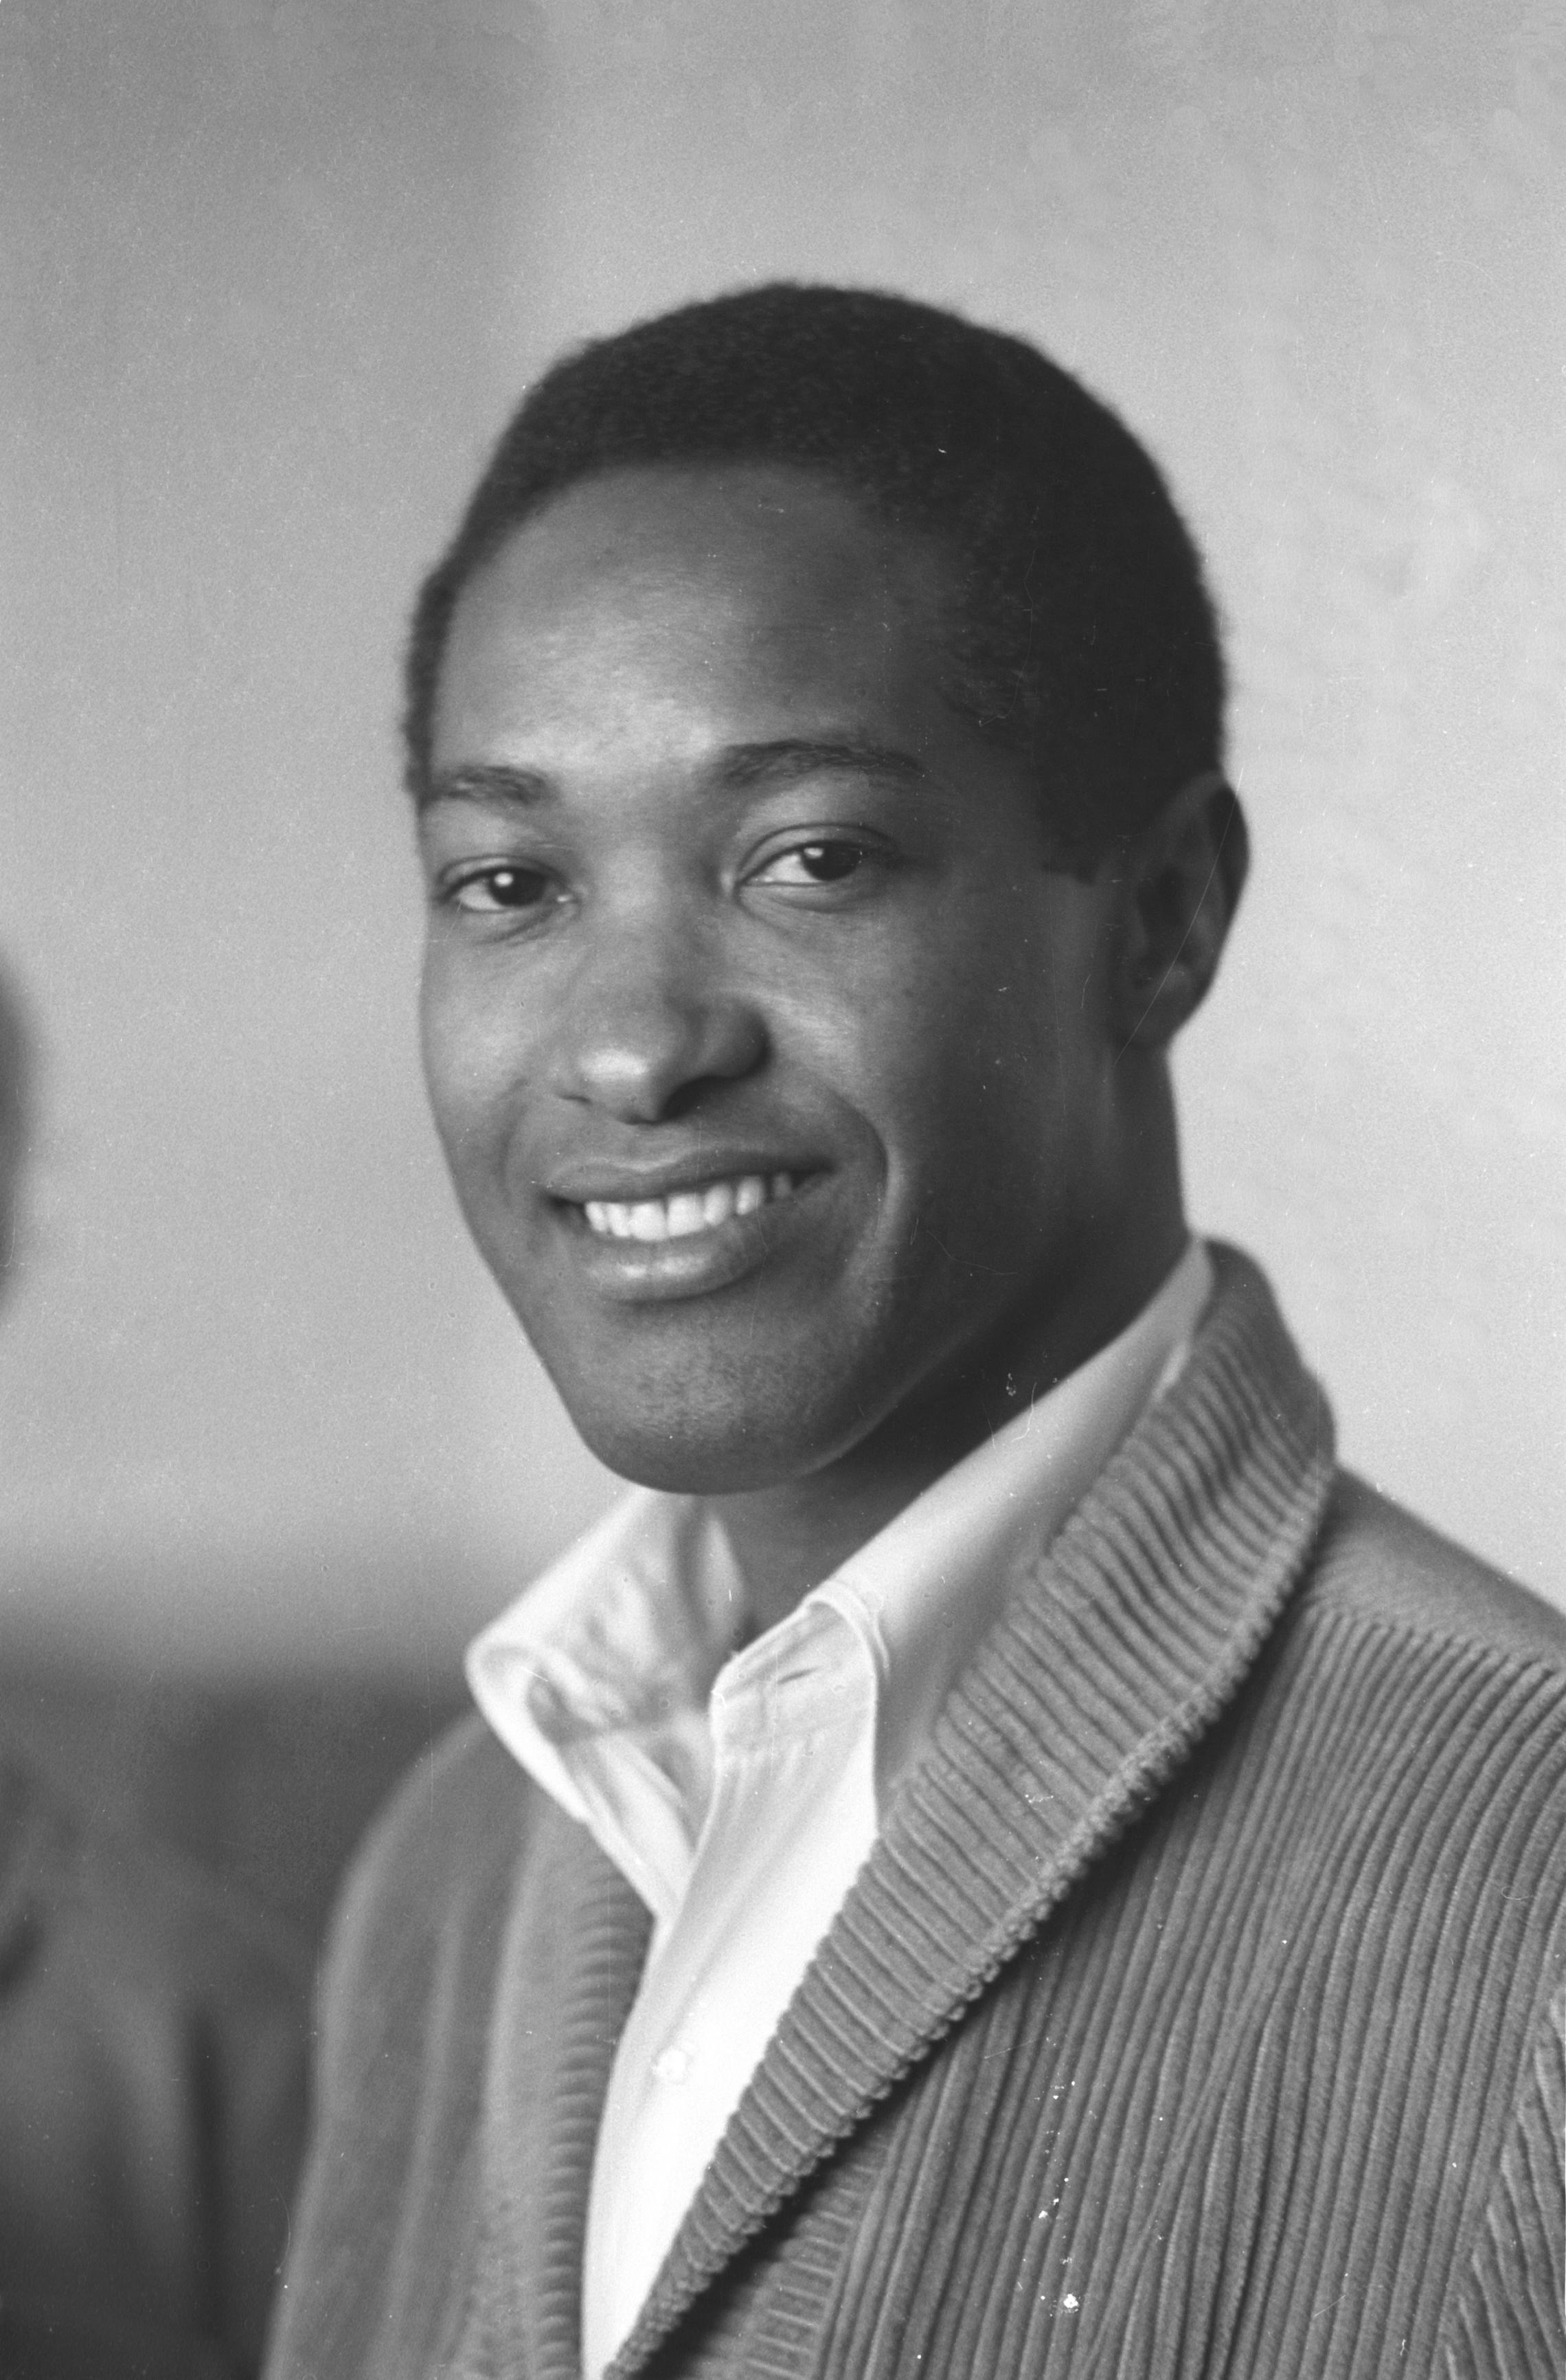 A photo of Sam Cooke, circa 1960 | Source: Getty Images